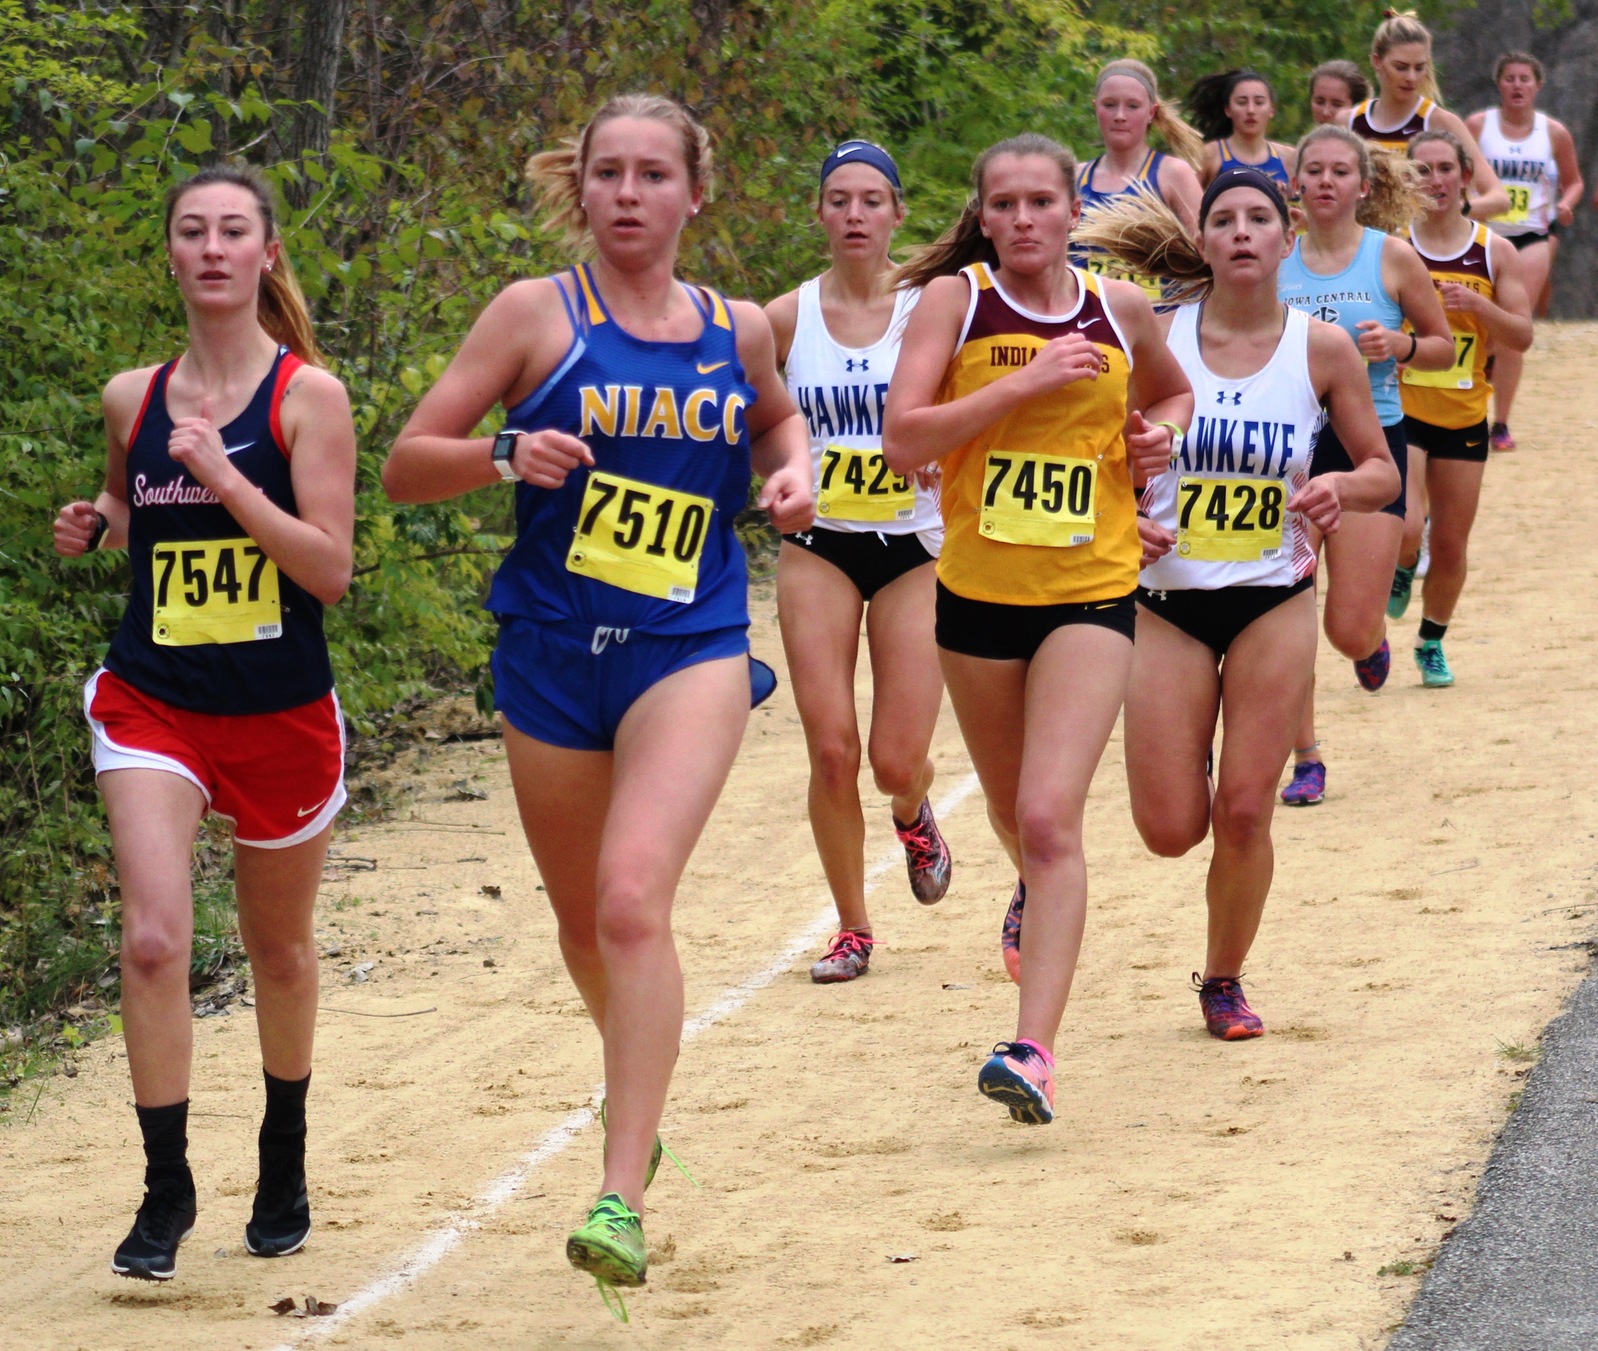 NIACC's Cecelia Hemsworth competes at the regional meet on Oct. 26 in Bettendorf.